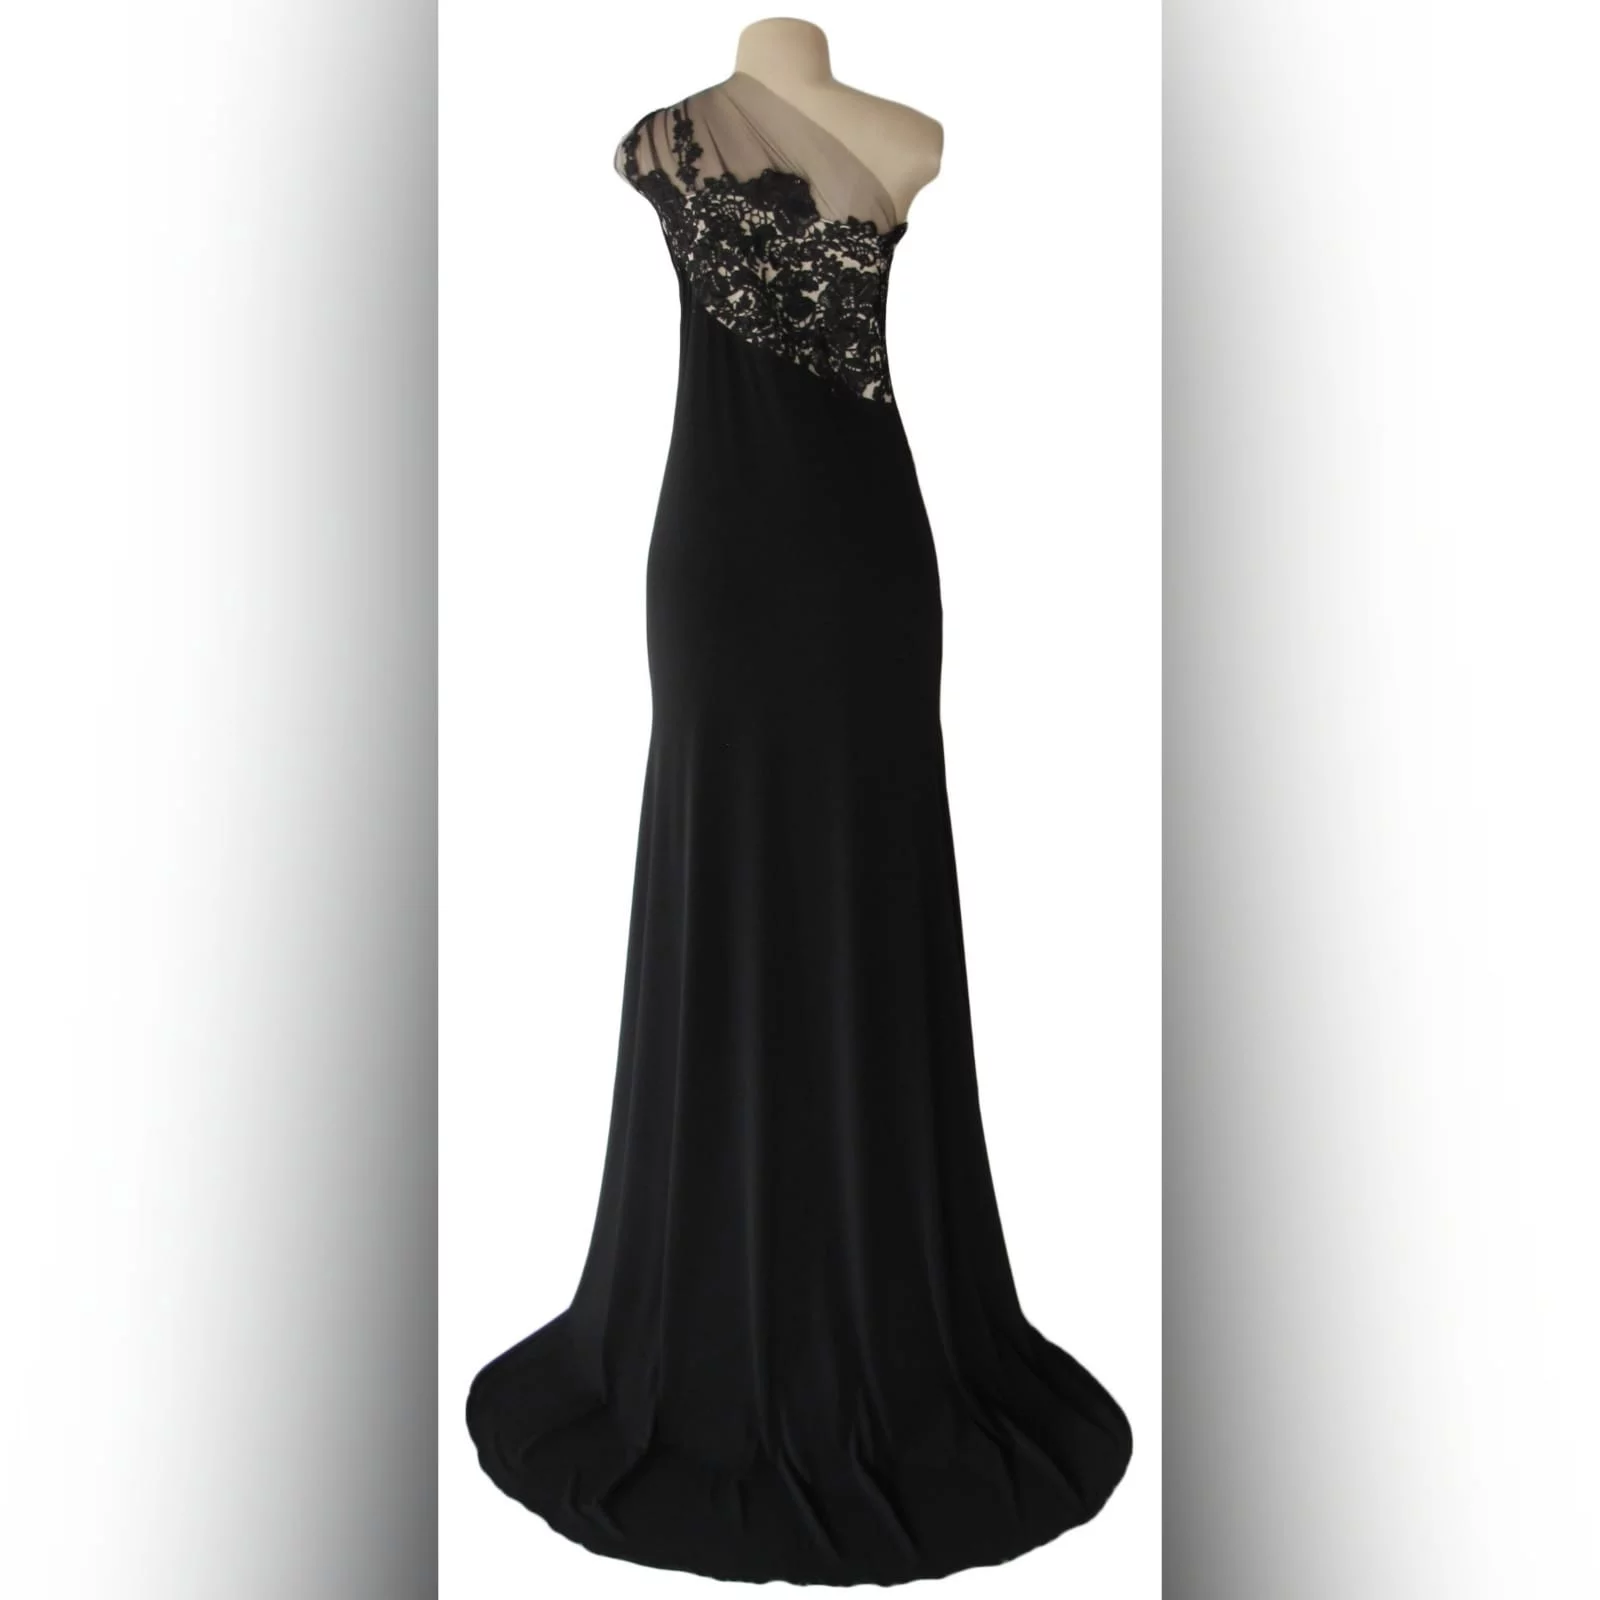 Long black evening dress with lace 2 single shoulder, lace bodice long black evening dress. With a slit and a train